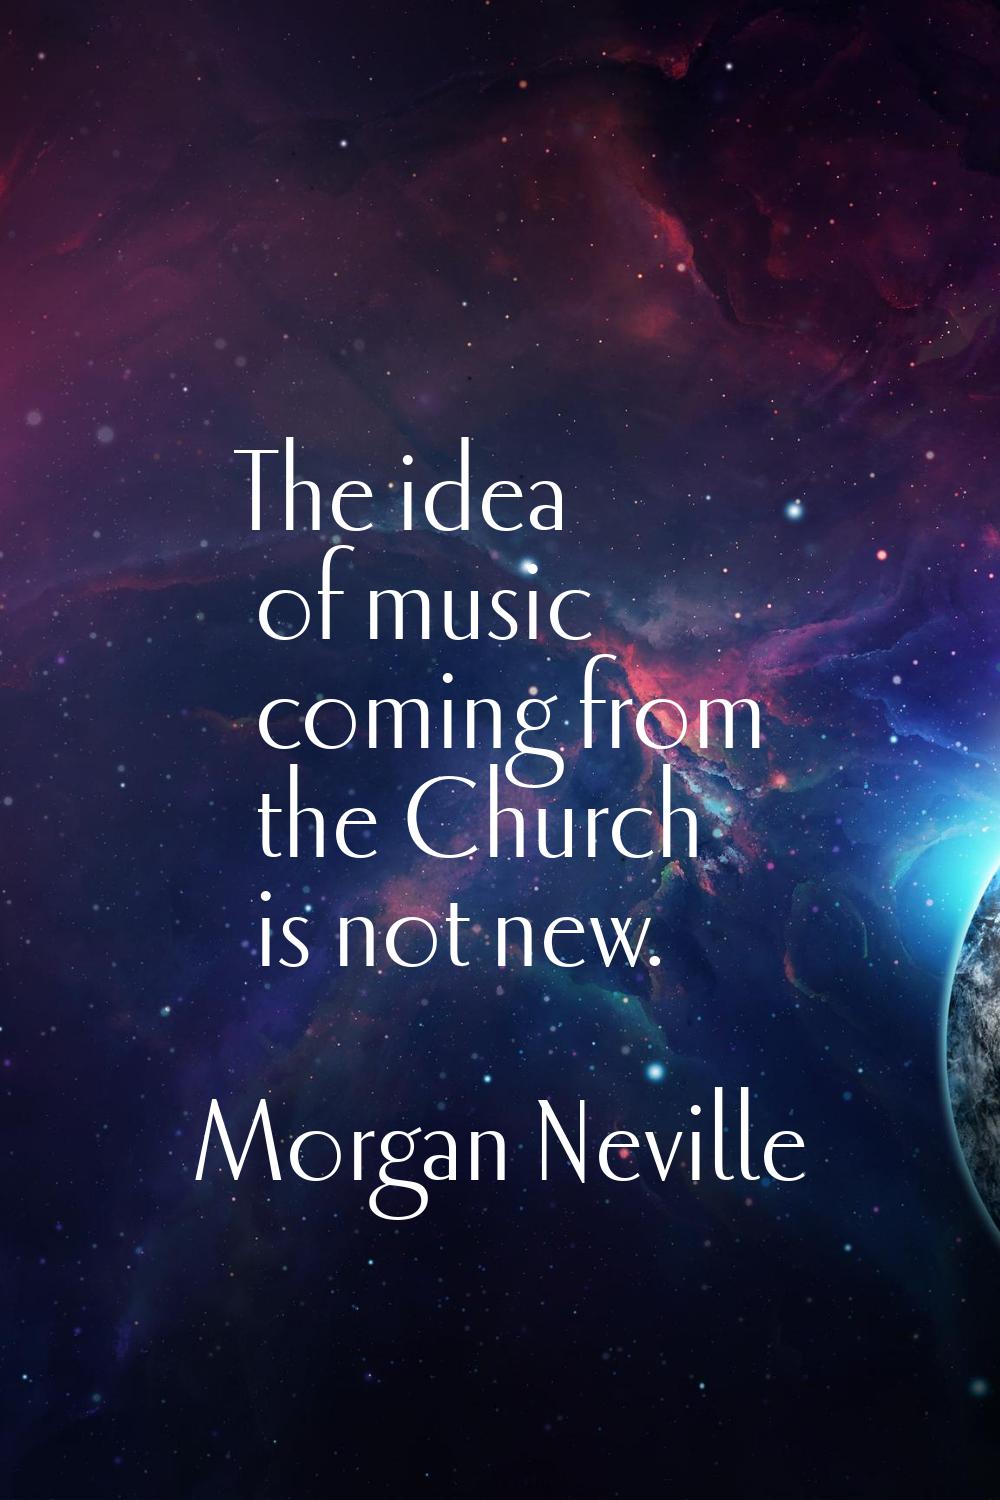 The idea of music coming from the Church is not new.